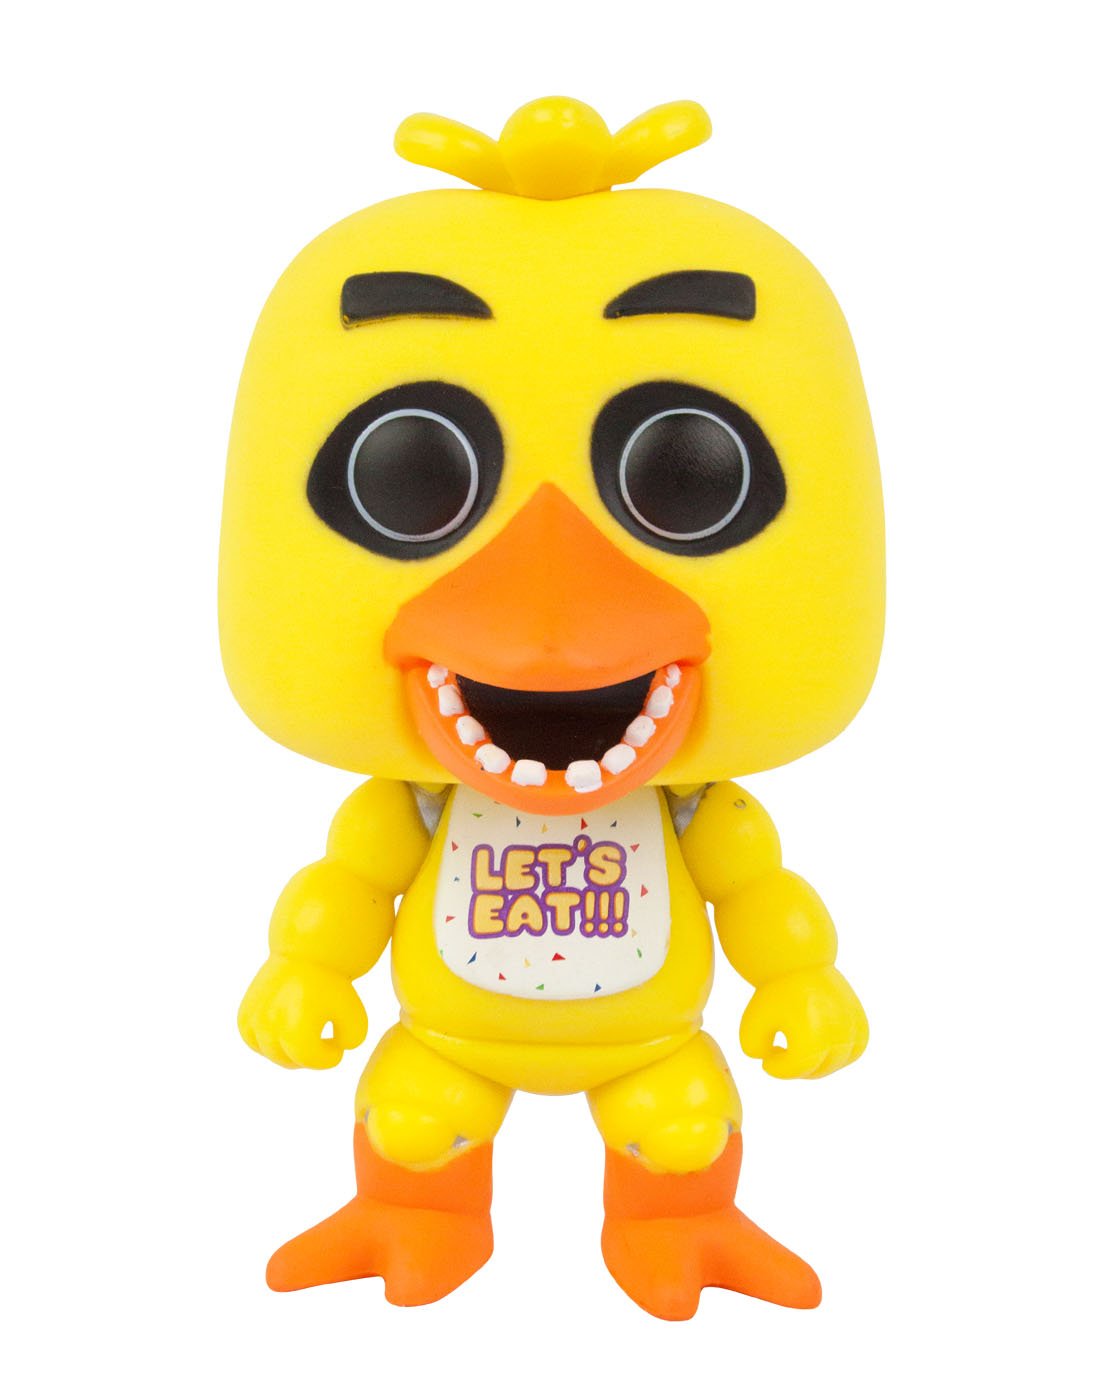 five nights at freddy's chica figure